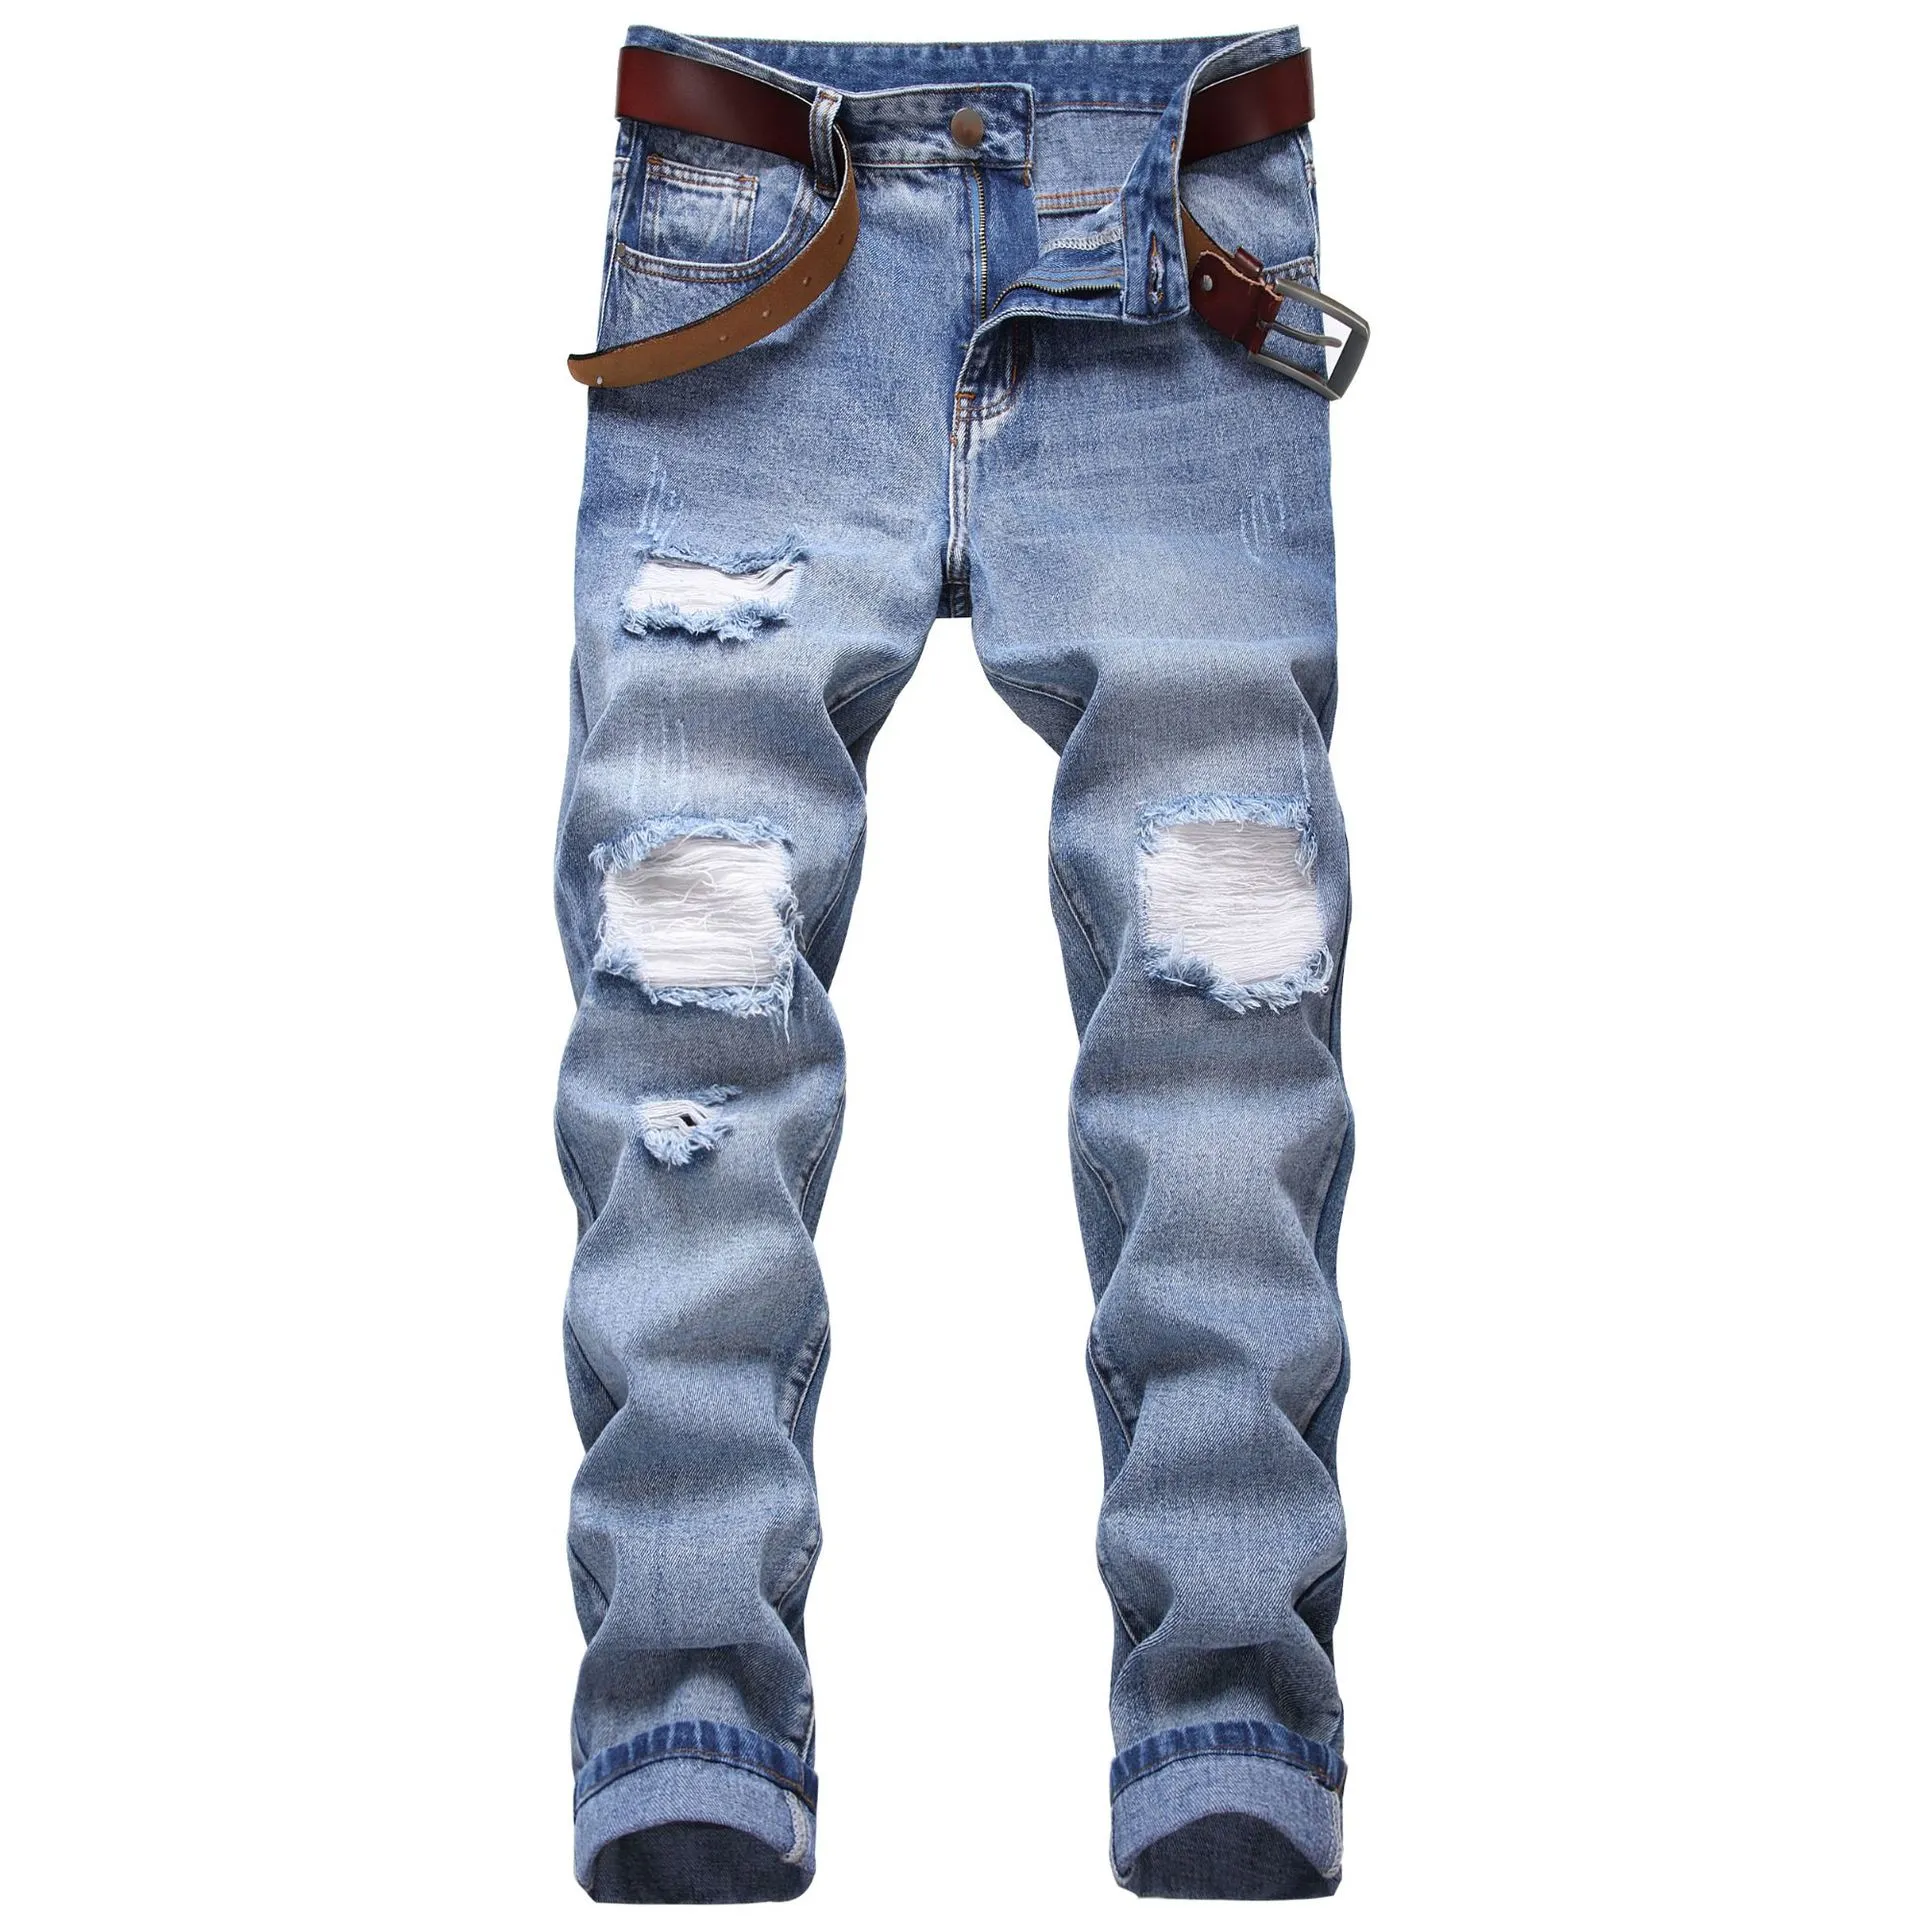 Pantalones vaqueros para hombre Street Style Mens Brand Washed Ripped Denim Pants con agujeros Strechy Homme Skinny